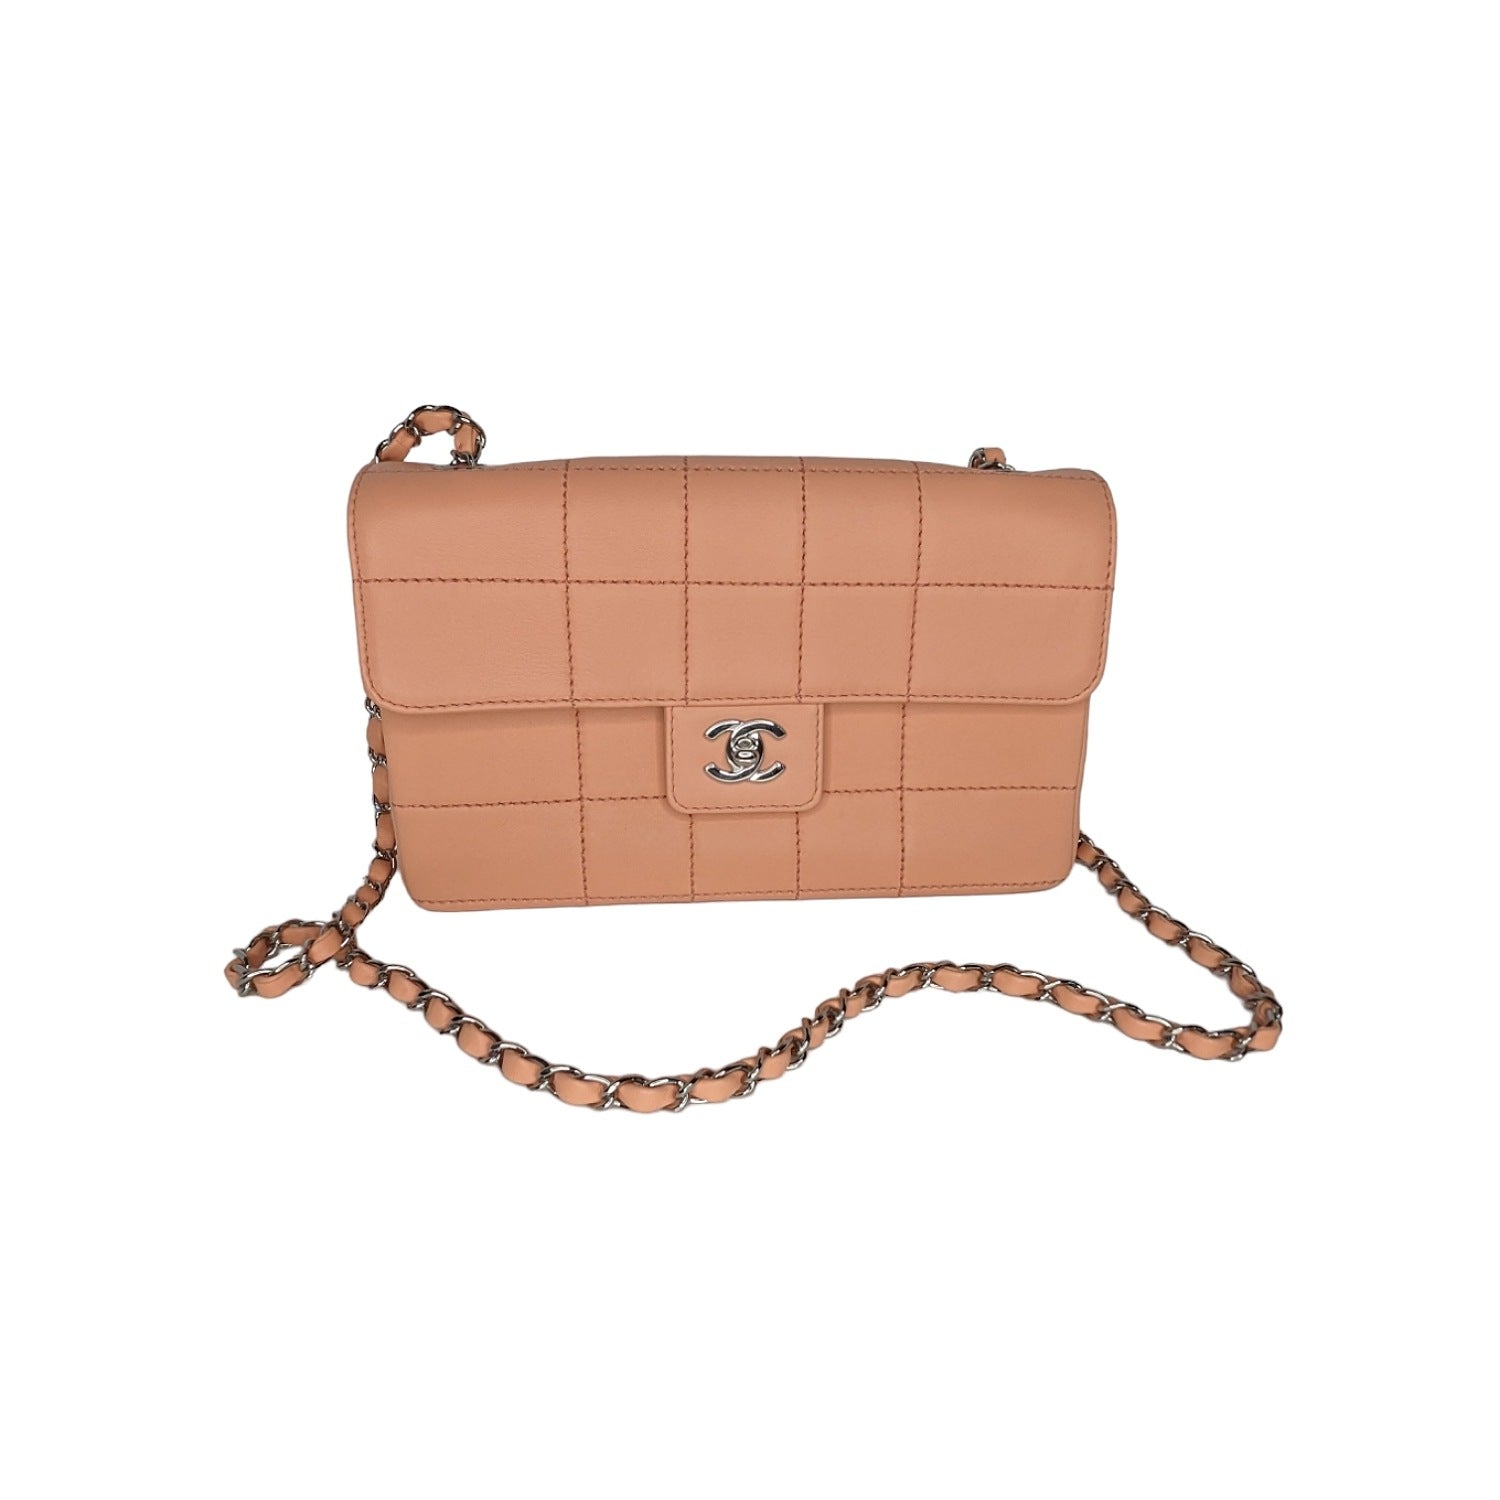 CHANEL, Bags, Chanel Classic Flap Bag In Chocolate Brown